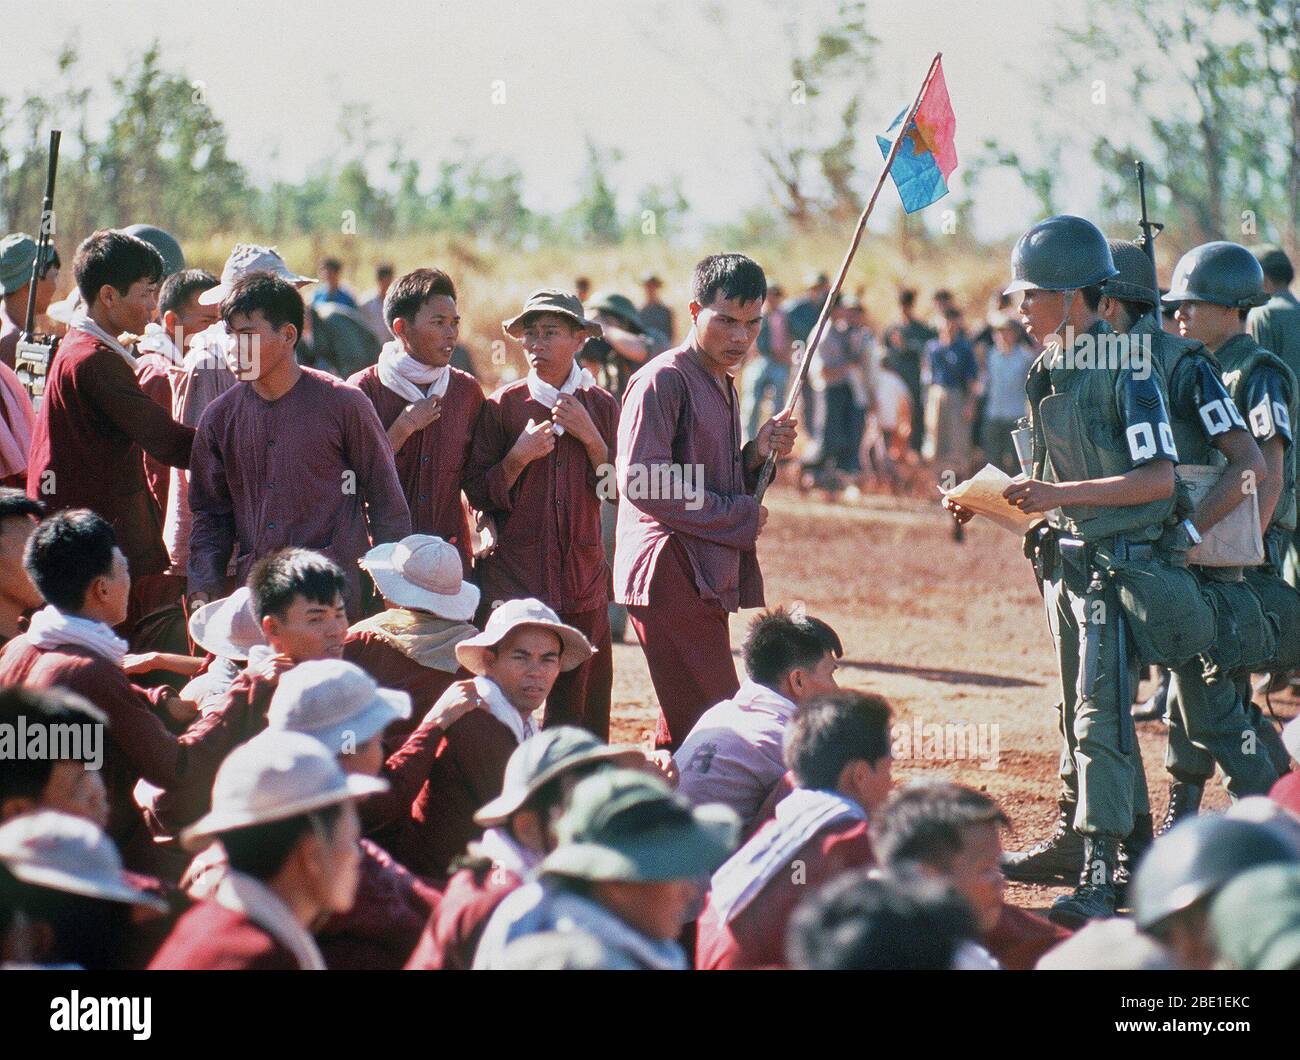 Viet Cong POWs, one with a Viet Cong flag, stand and sit at the exchange location.  They were flown in on USAF C-130 aircraft from Bien Hoa Air Base.  They will be exchanged for American and South Vietnamese POWs held by the Viet Cong forces. Stock Photo